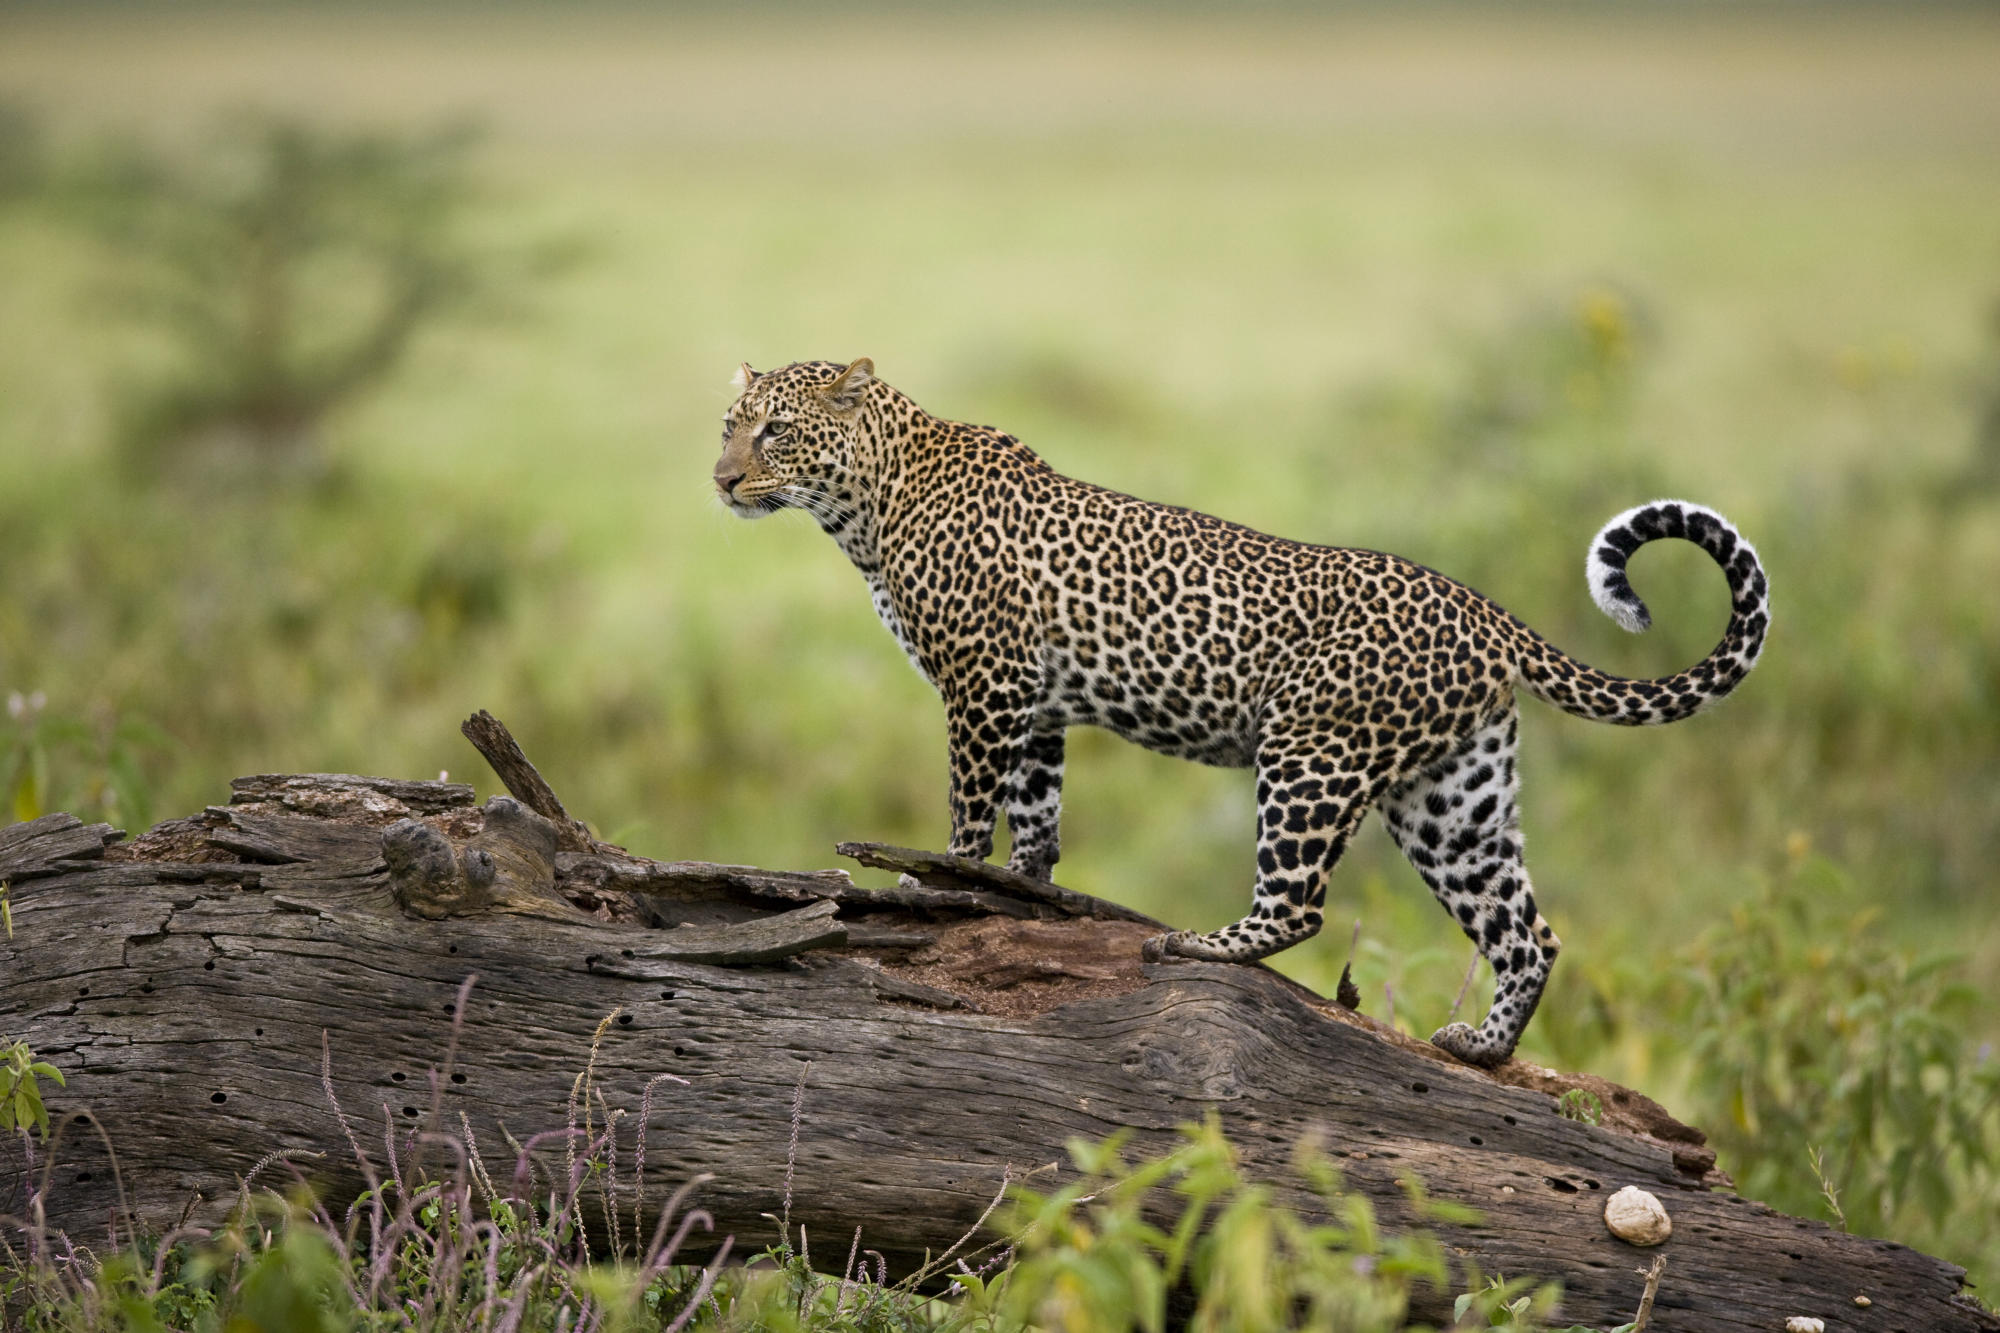 Leopard prowling in the wild